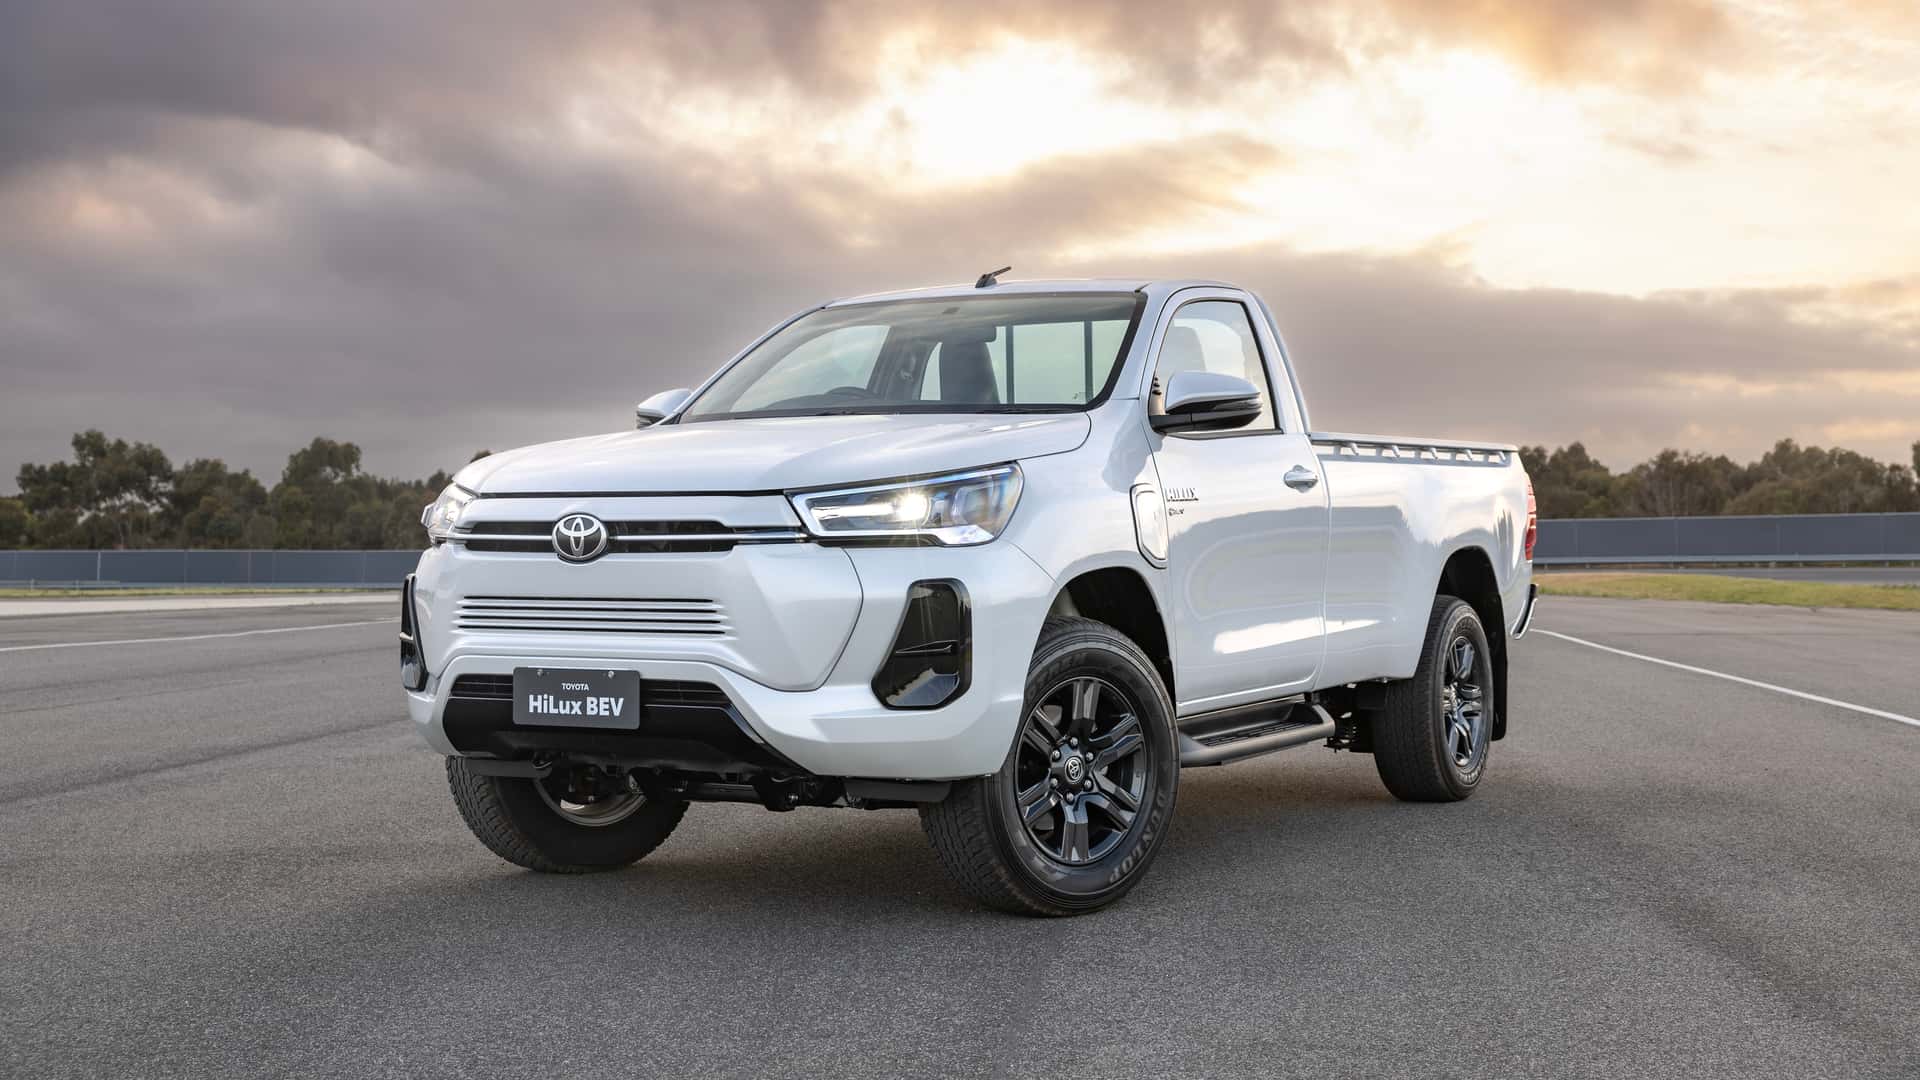 toyota will try out electric pickups as taxis in thailand soon: report